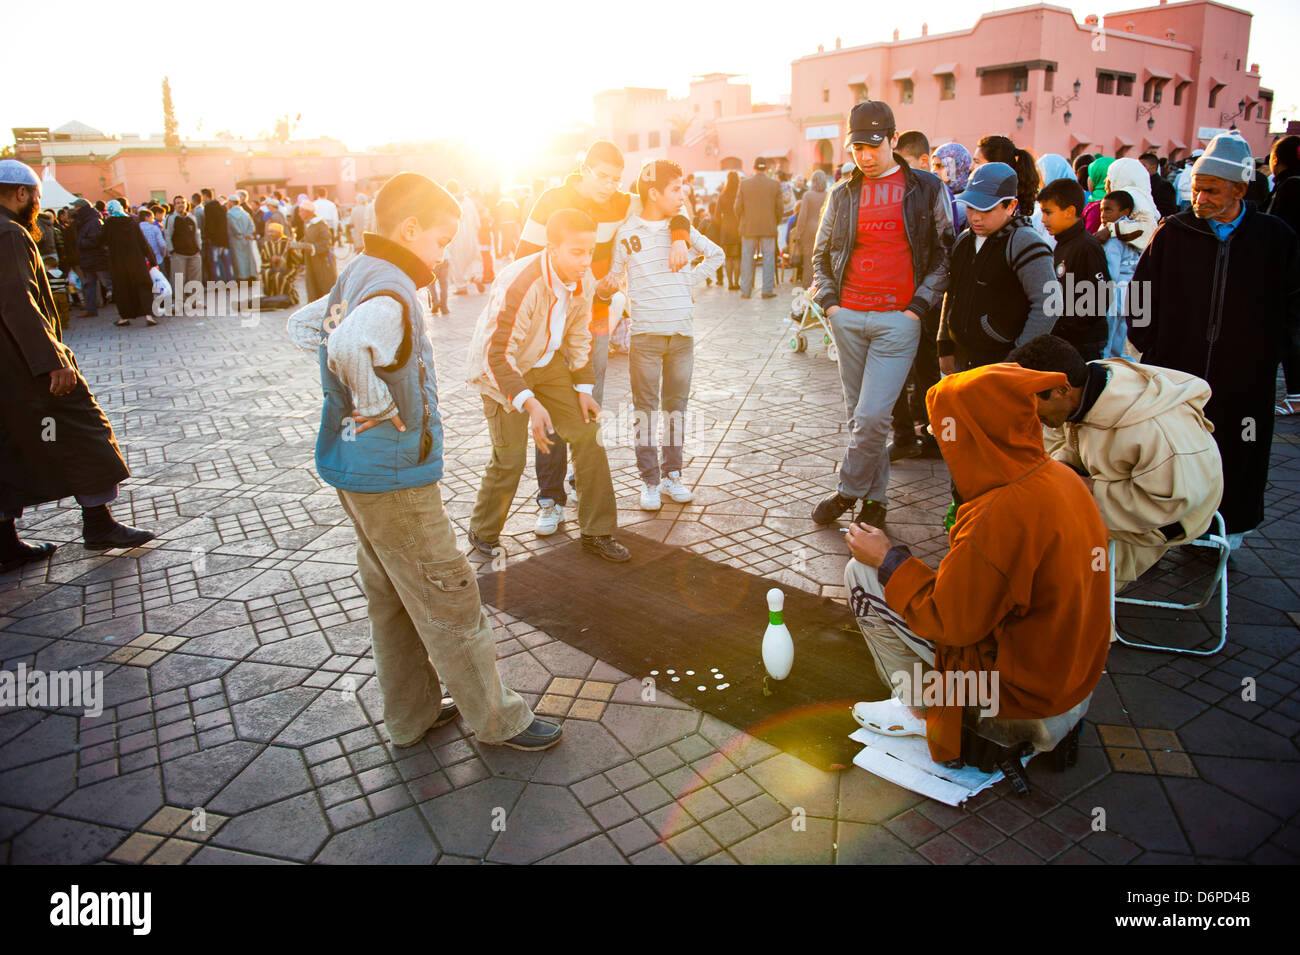 Moroccan people playing street games in Place Djemaa El Fna, the famous square in Marrakech, Morocco, North Africa, Africa Stock Photo